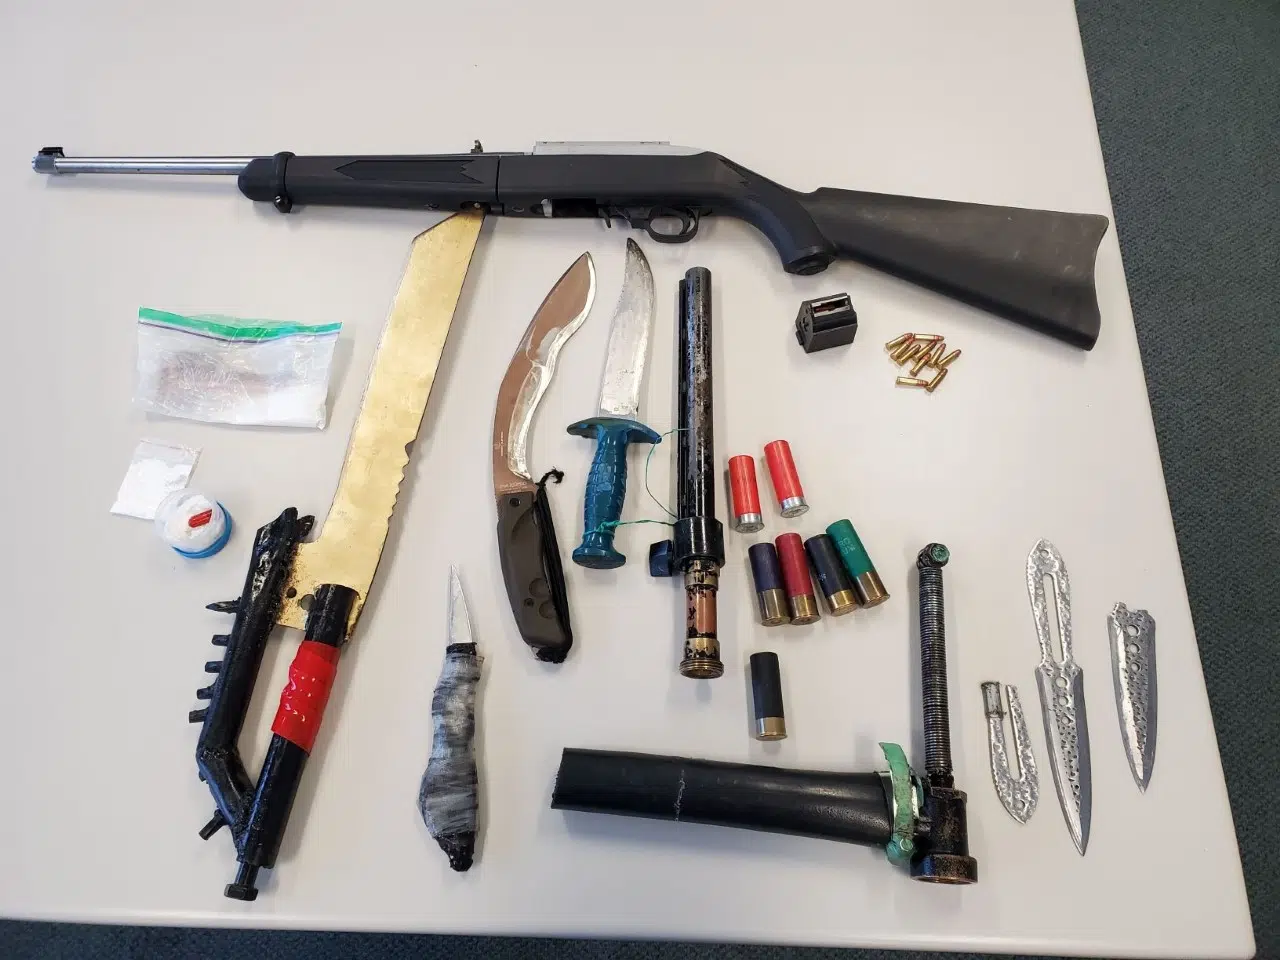 Dangerous Weapons Seized From Keewatin Home